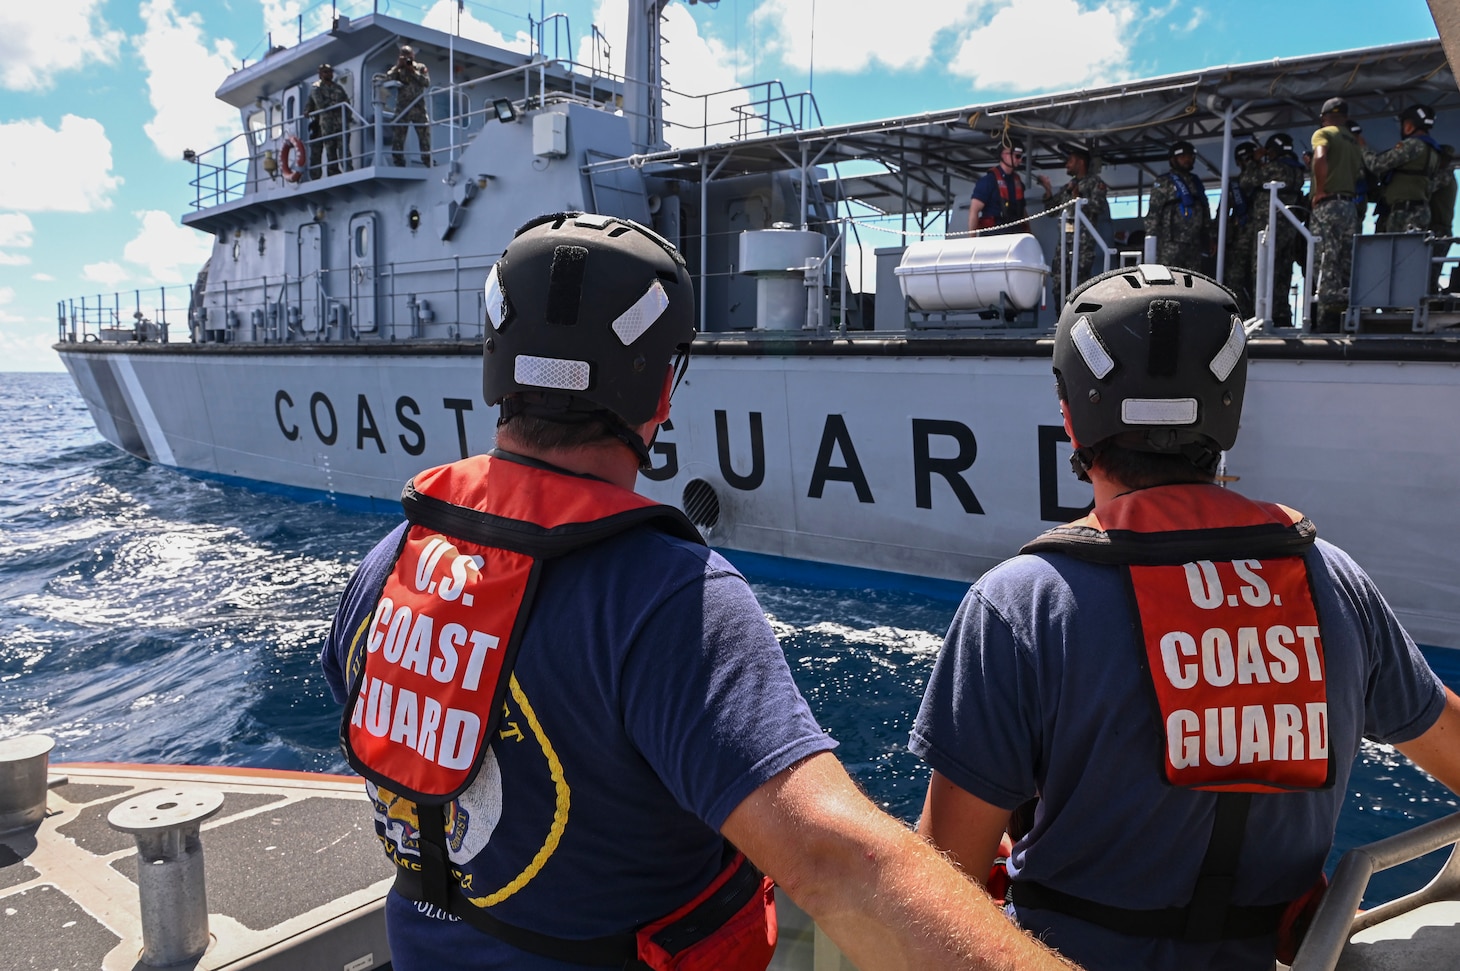 Crewmembers from U.S. Coast Guard Cutter Midgett (WMSL 757) stand ready to receive passengers from the Maldivian Coast Guard ship Ghazee during a joint exercise held in the waters east of the Maldives, Sept. 22, 2022. These professional exchanges are designed to share expertise and best practices in completing missions. (U.S. Coast Guard photo by Petty Officer Steve Strohmaier)